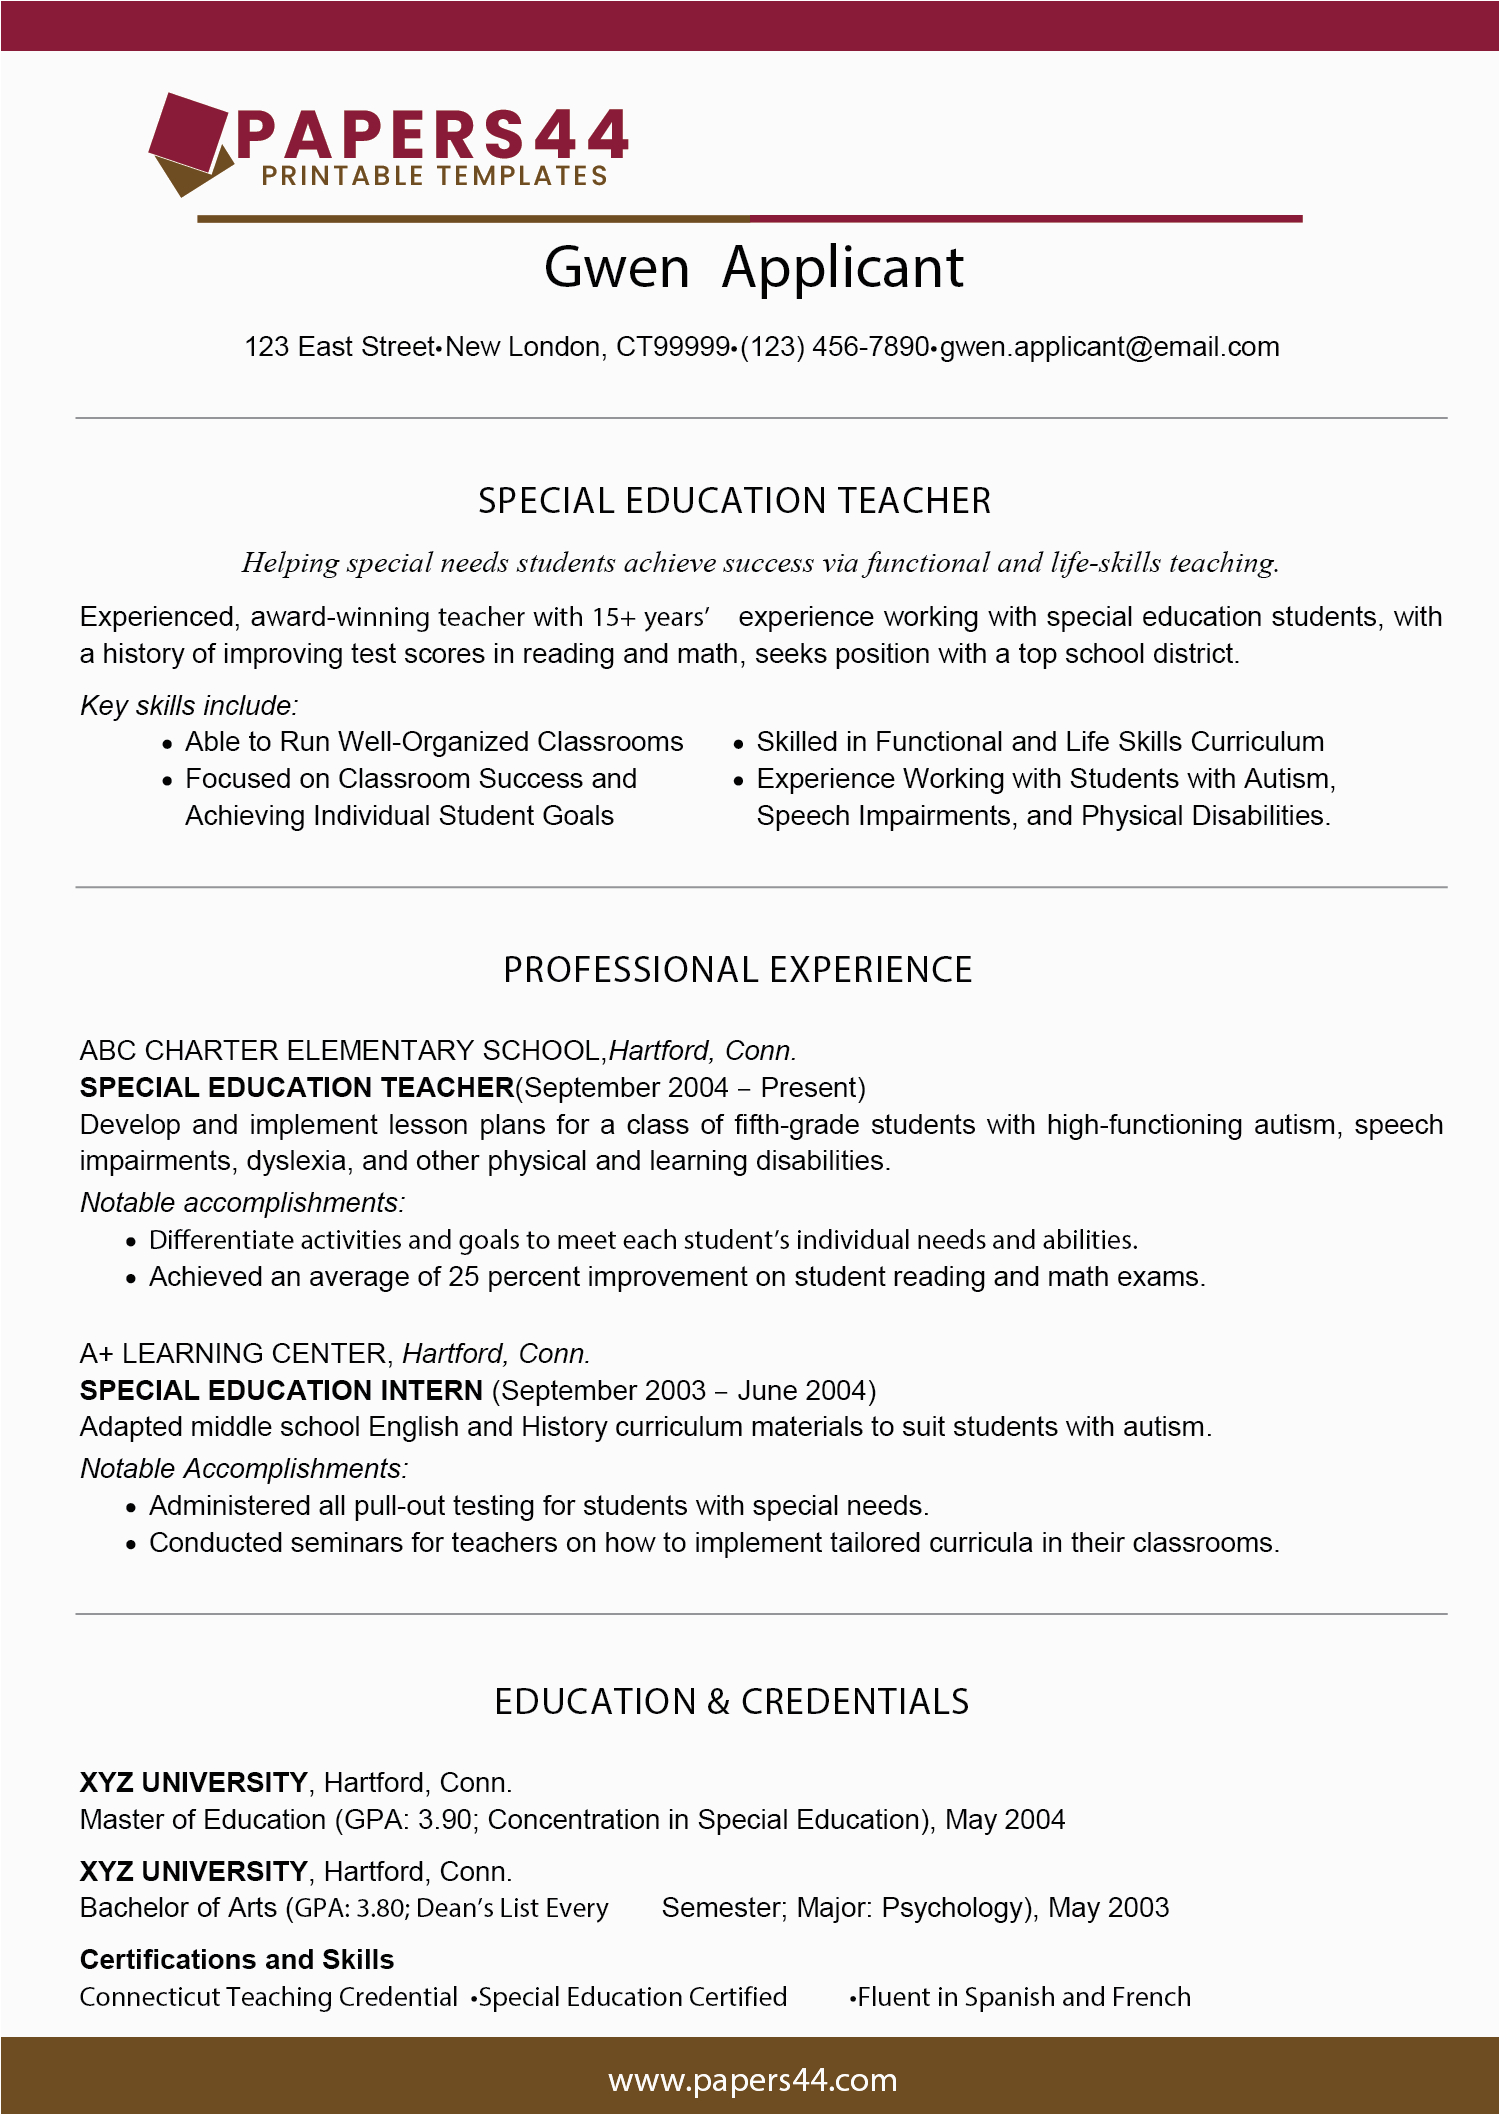 Free Resume Templates for Teaching Positions Professional Teacher Resume Templates